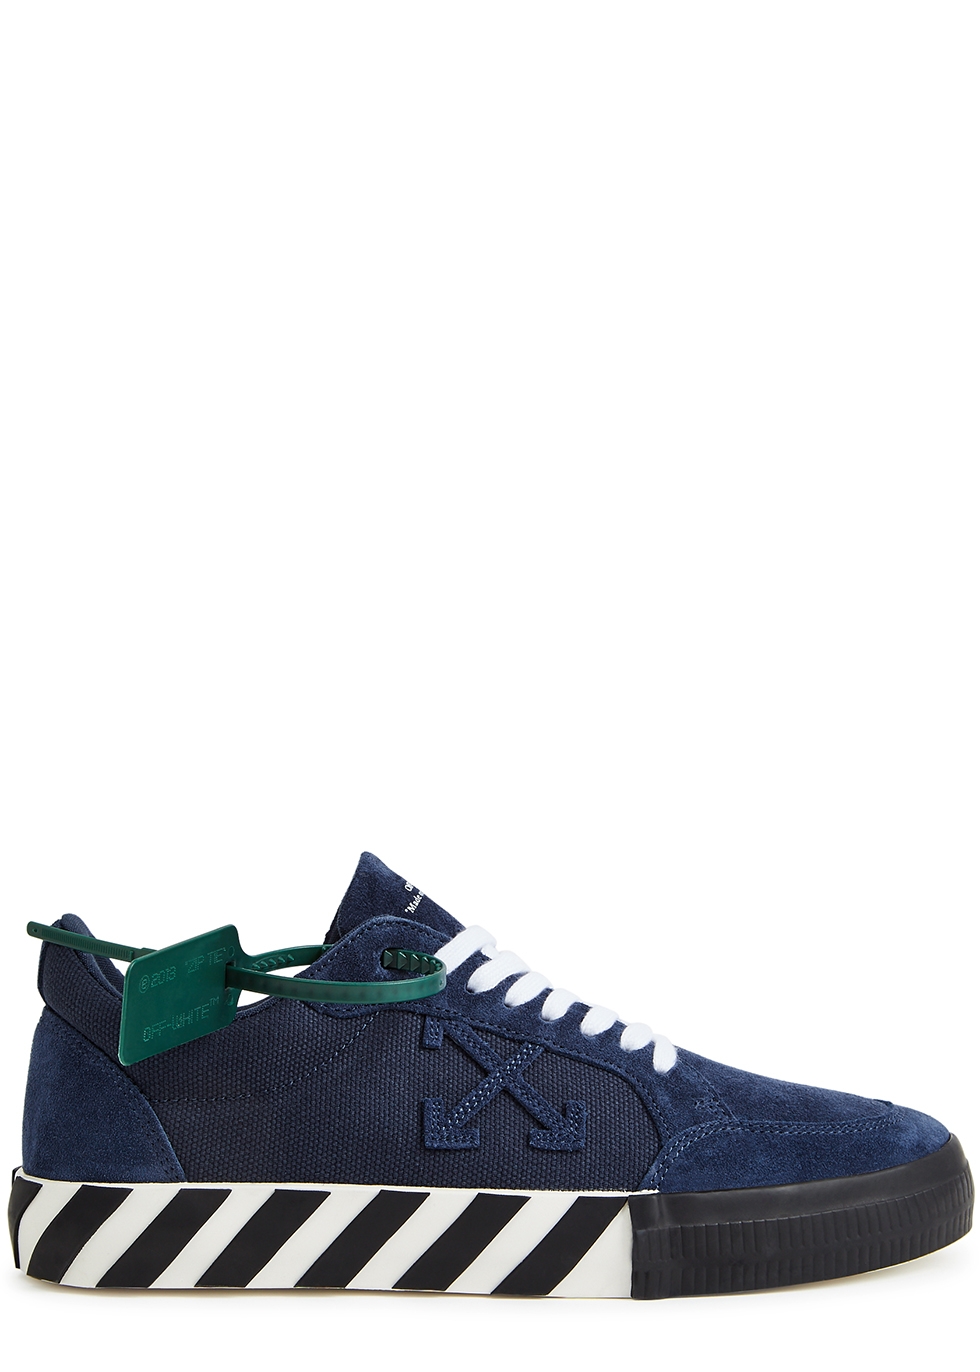 Vulcanized navy panelled suede sneakers